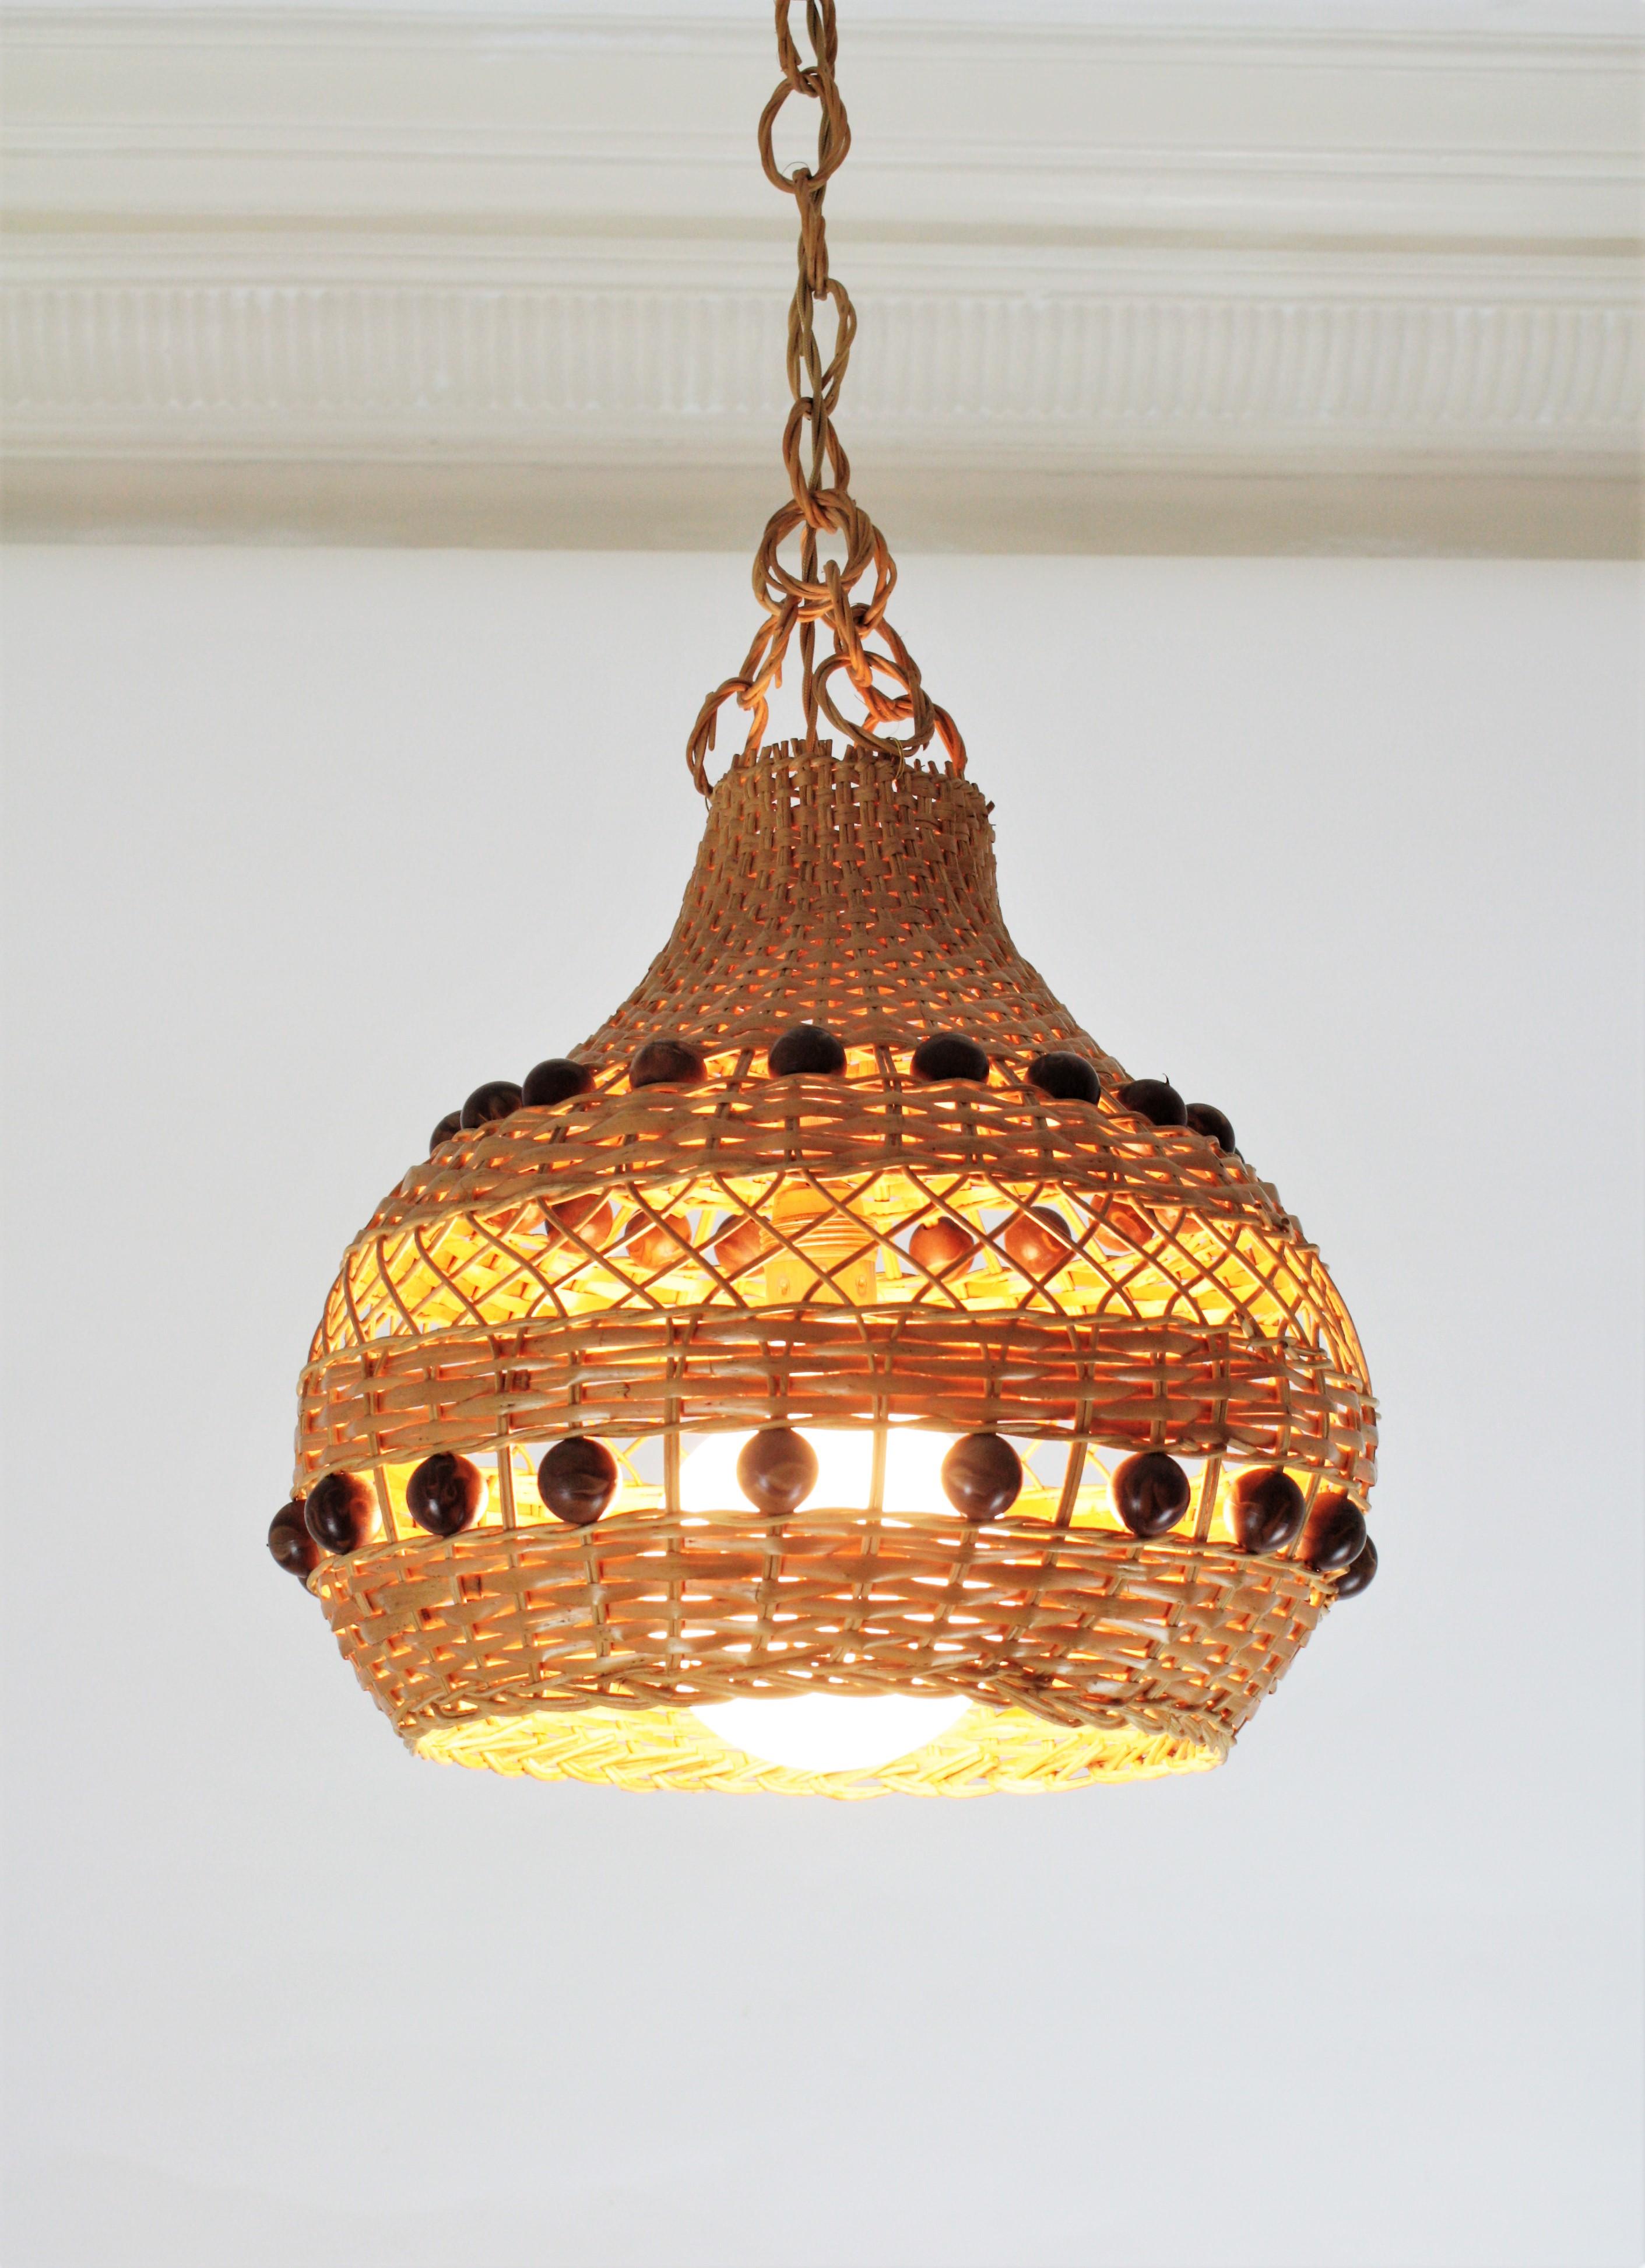 Spanish Rattan Pendant Light / Lantern with Balls Accents For Sale 3